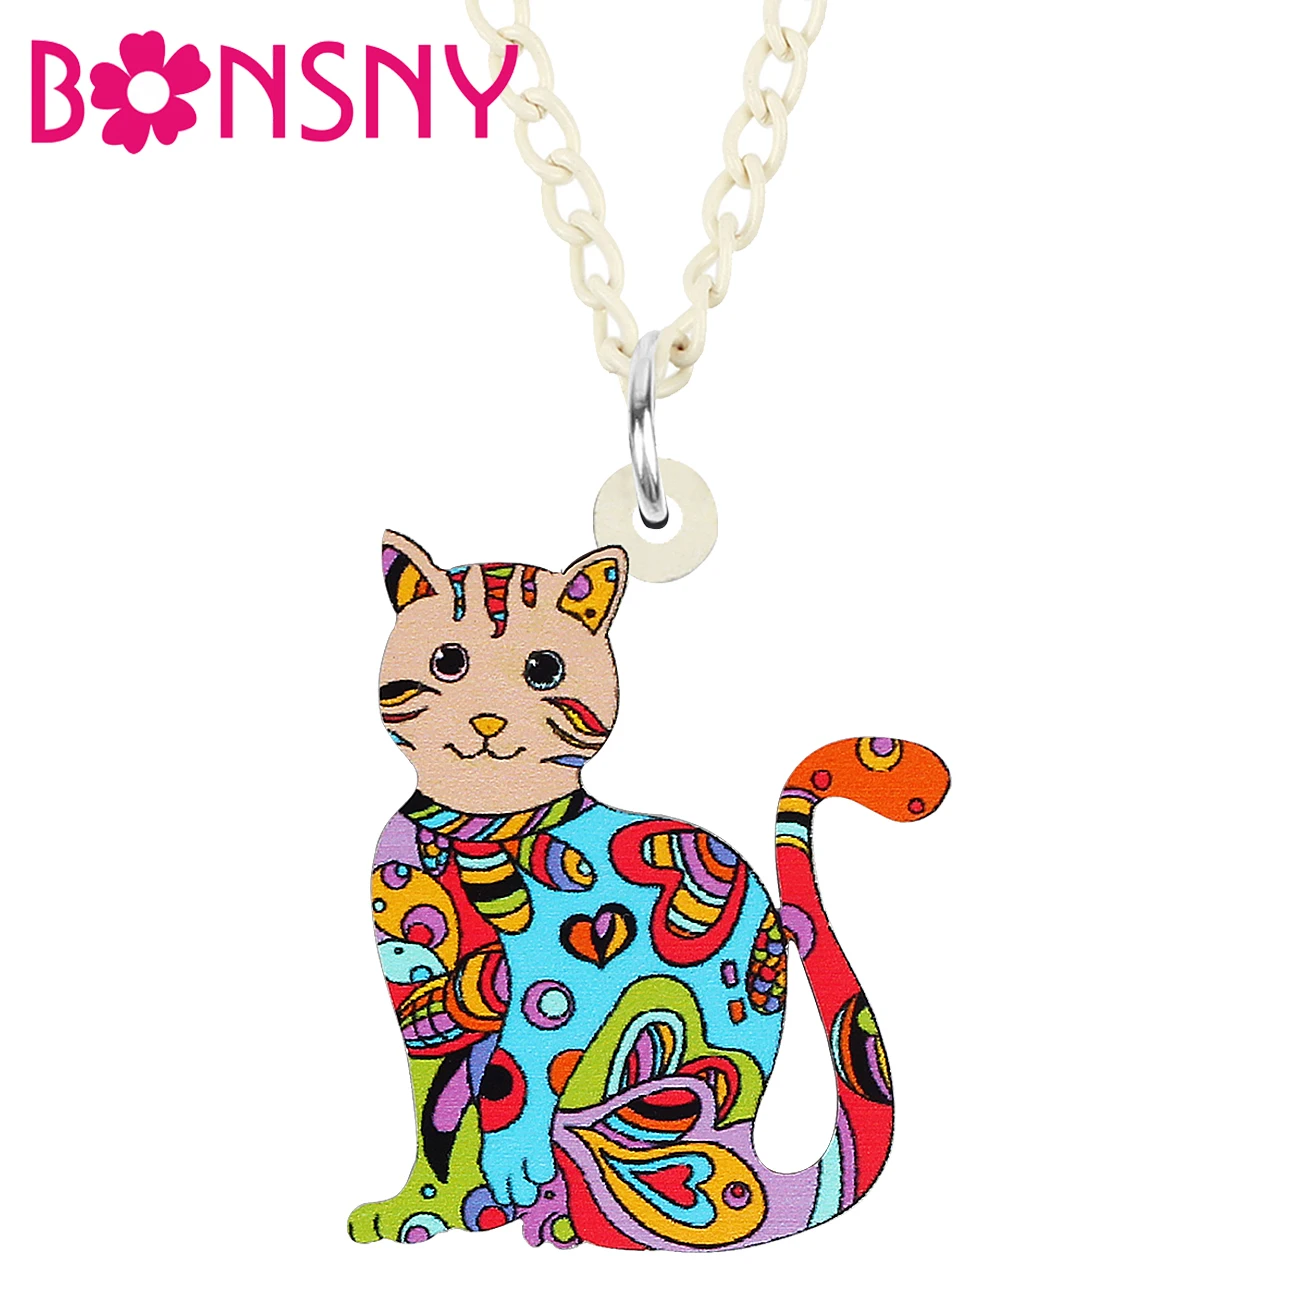 

BONSNY Acrylic Sweet Floral Cat Kitten Necklace Pendant Long Fashion Pets Novelty Chain Charm Jewelry Gift For Women Girls Teens